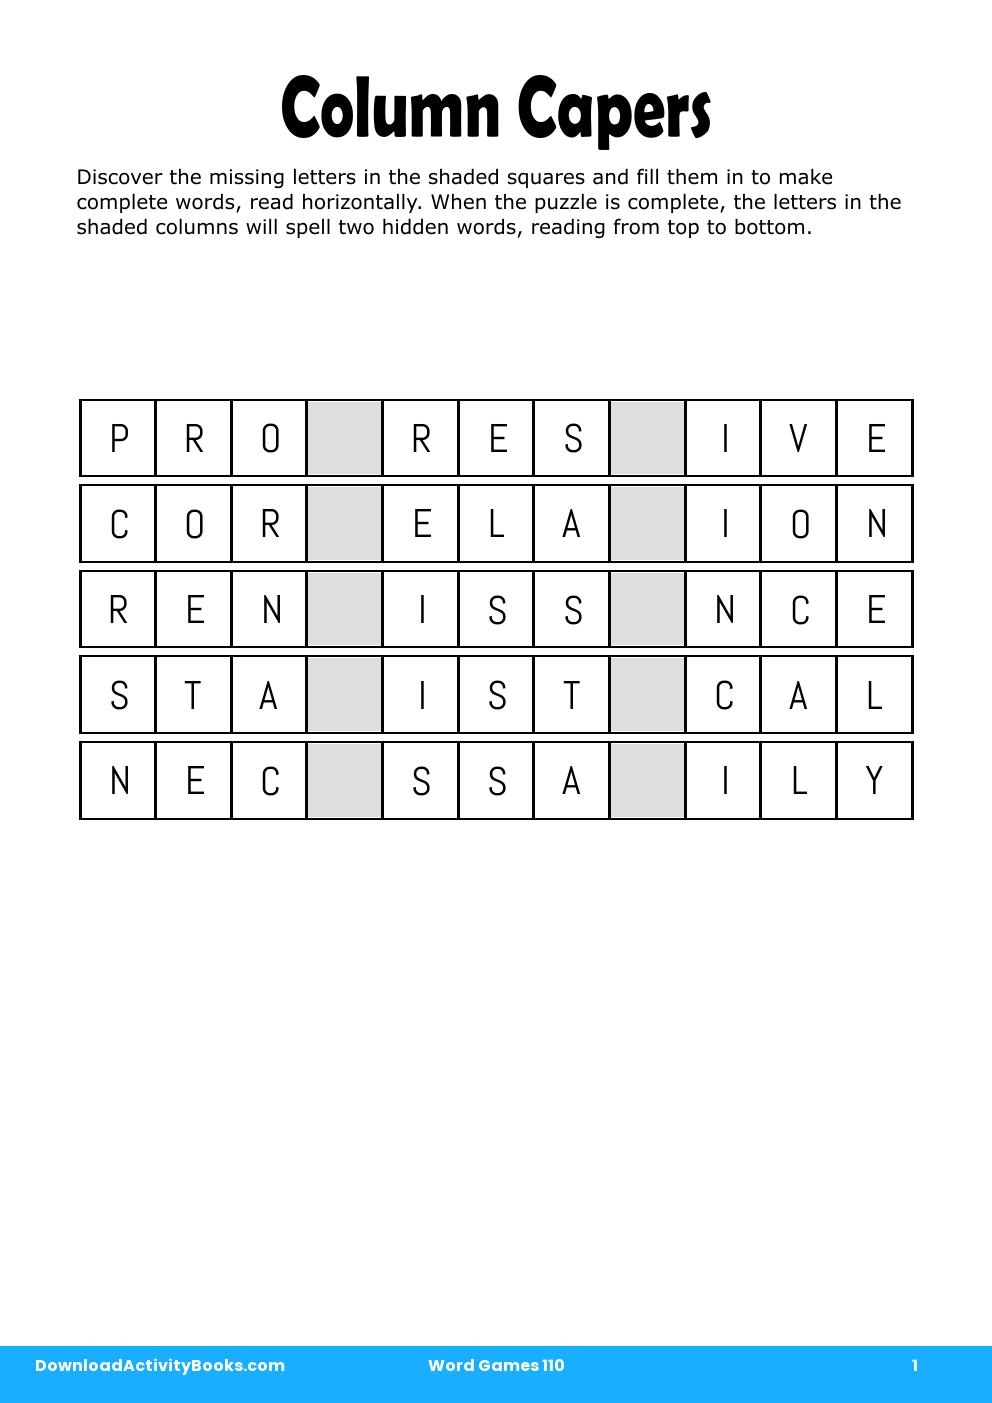 Column Capers in Word Games 110